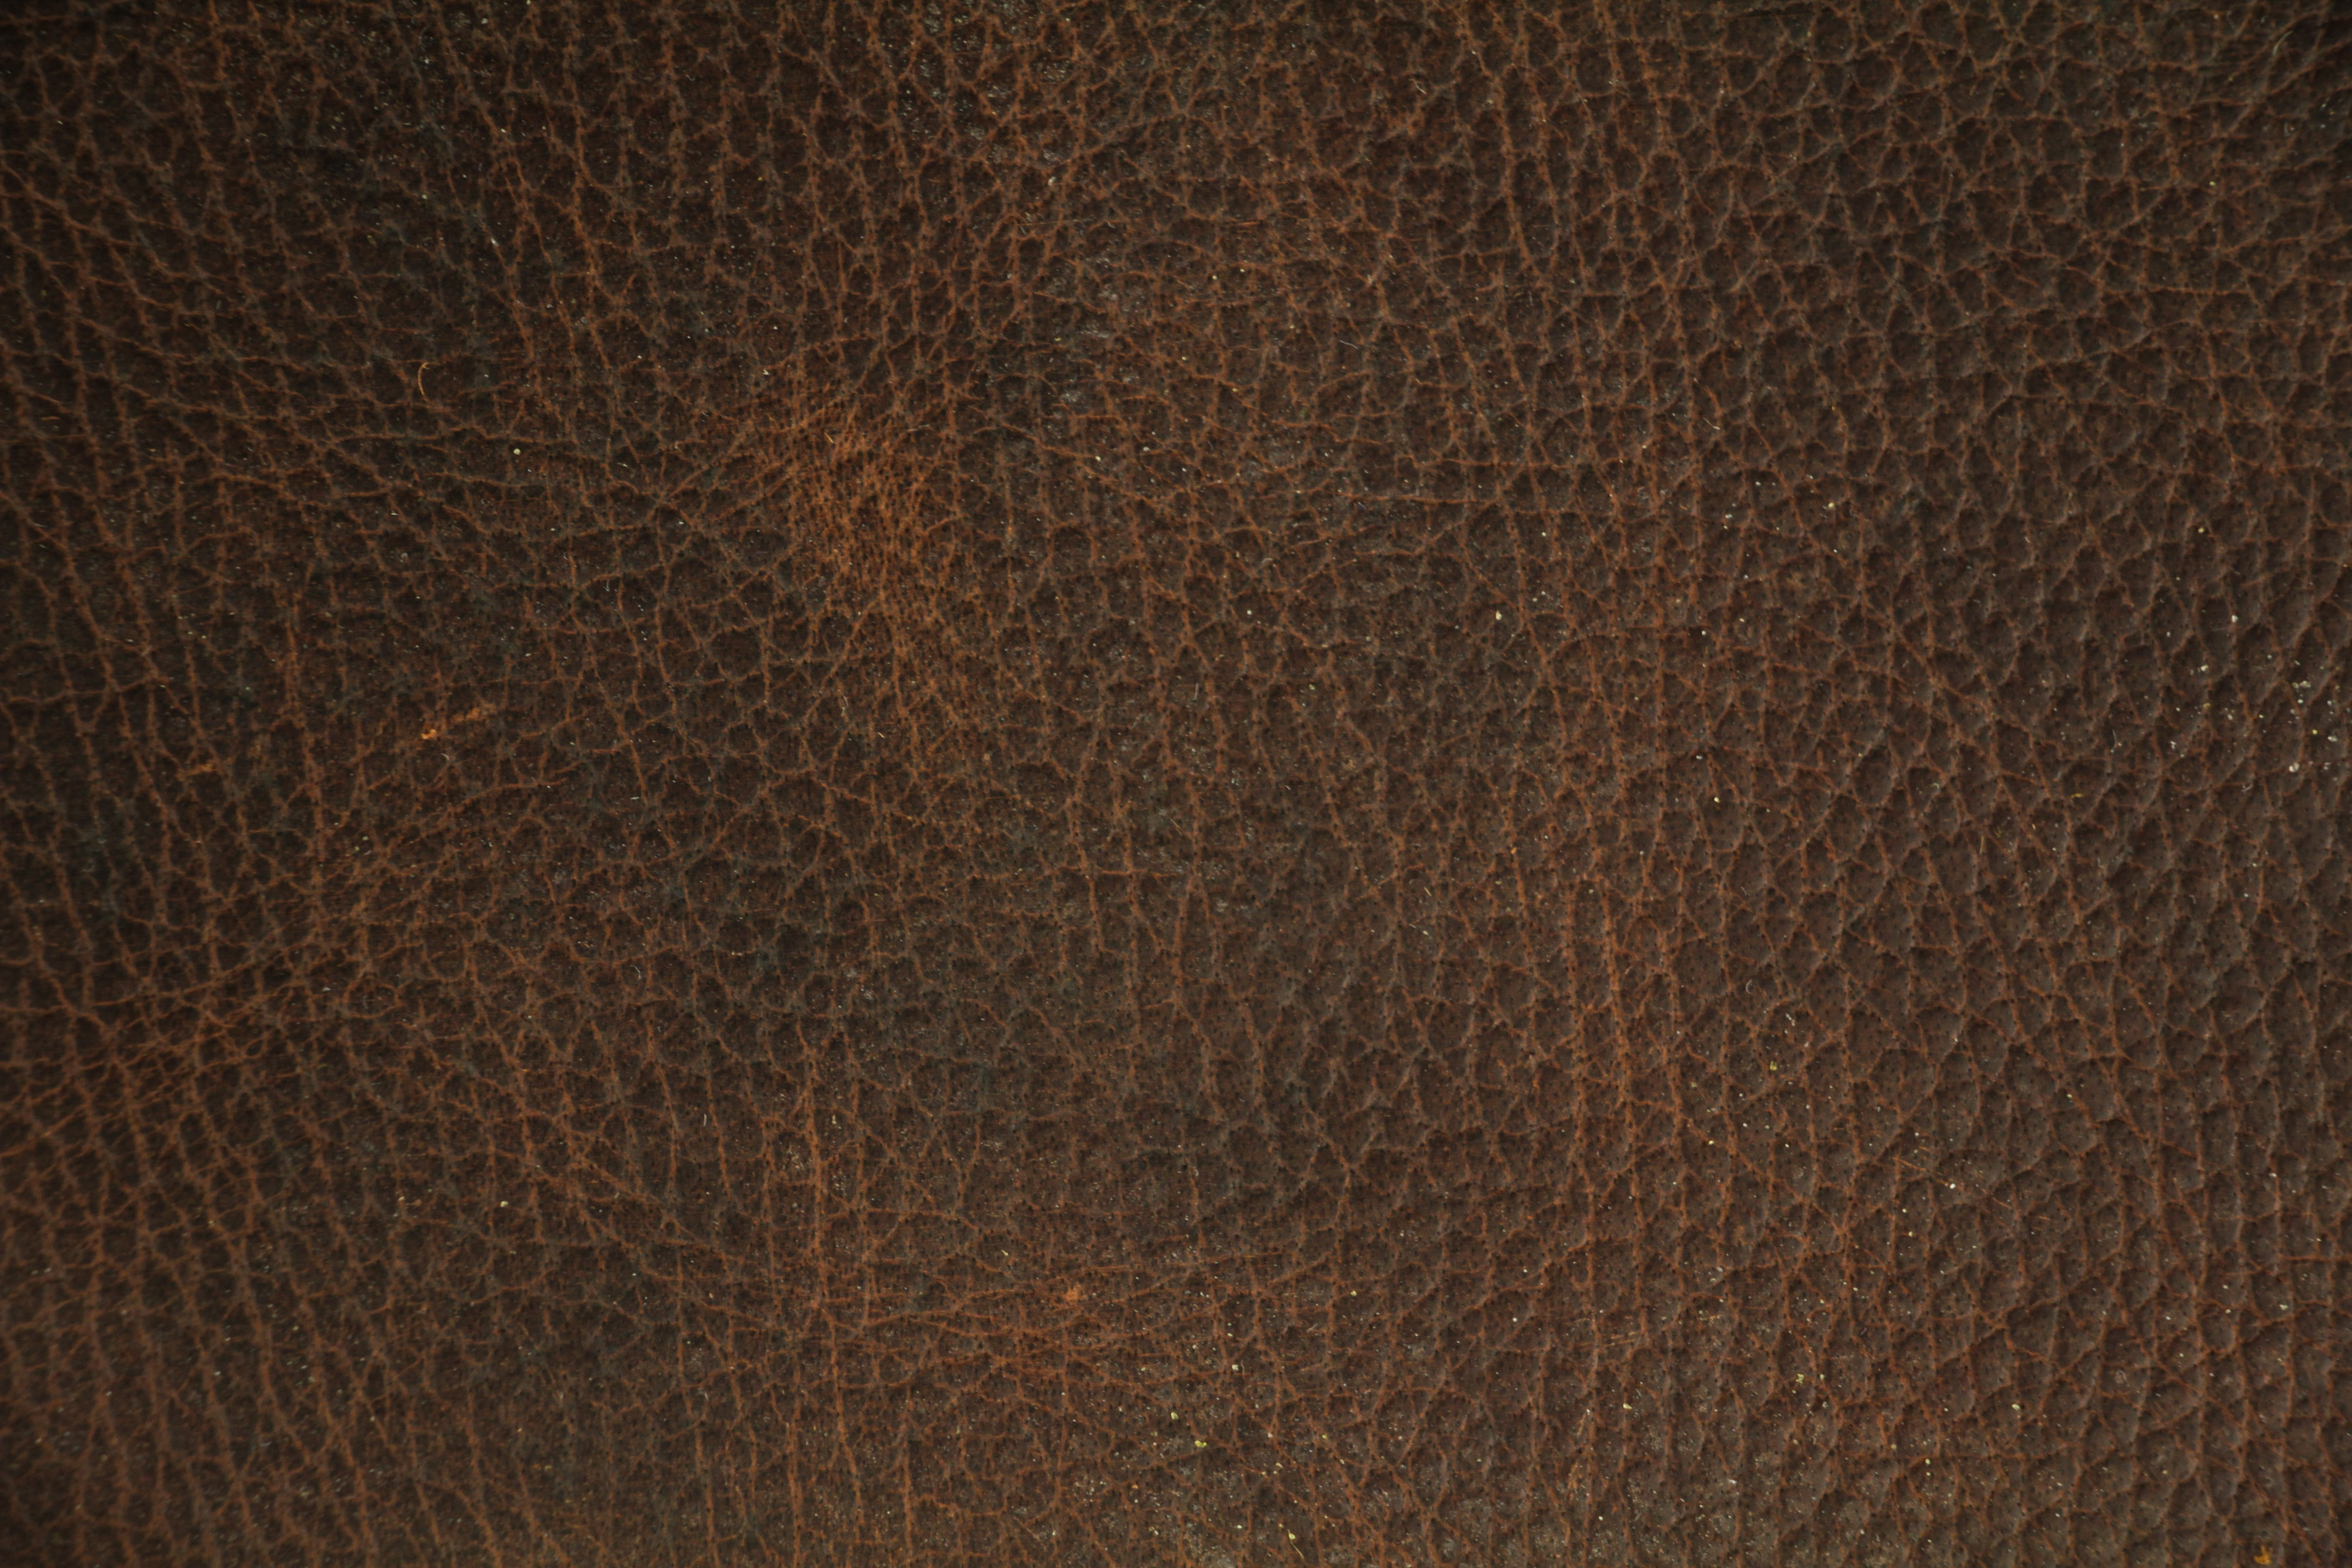 coudy-brown-leather-texture-wallpaper-fabric-stock-image-design